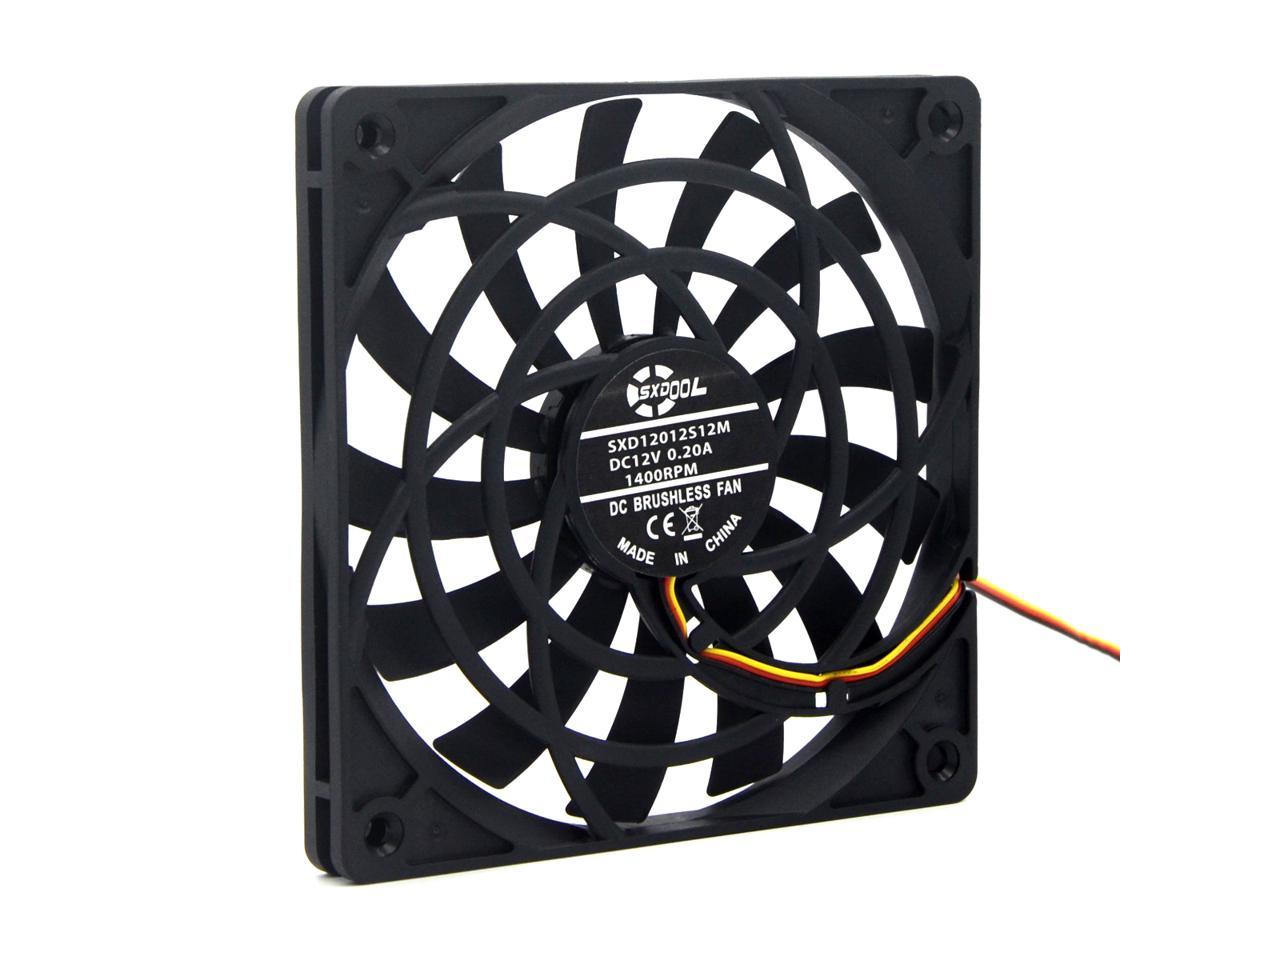 NEW 120mm slim fan 12012 0.19A 12MM thick slim chassis cpu cooling fan ...